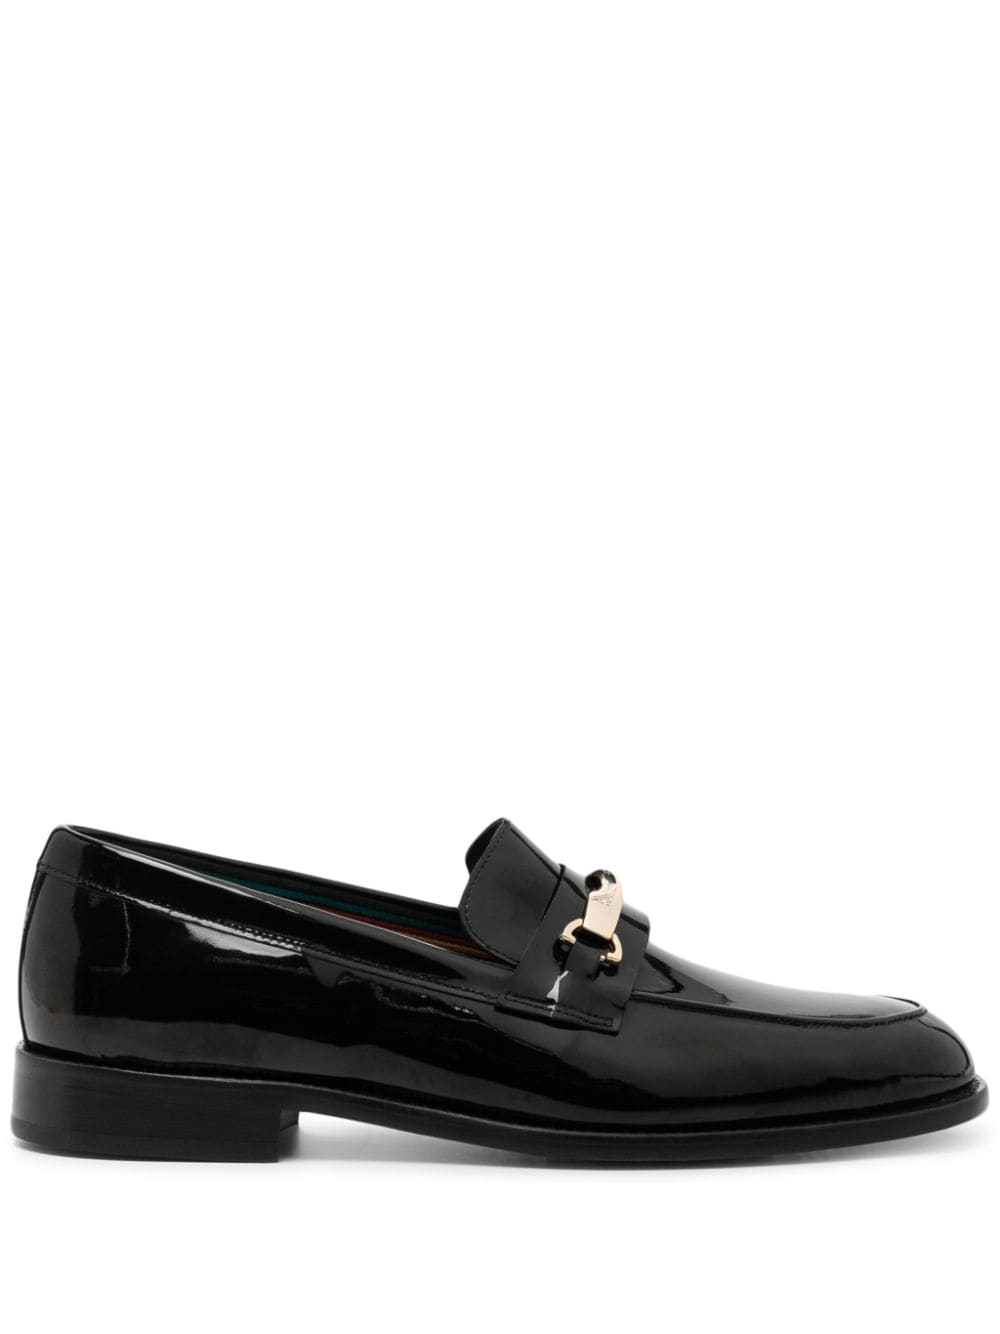 Paul Smith Montego patent leather loafers - Black von Paul Smith